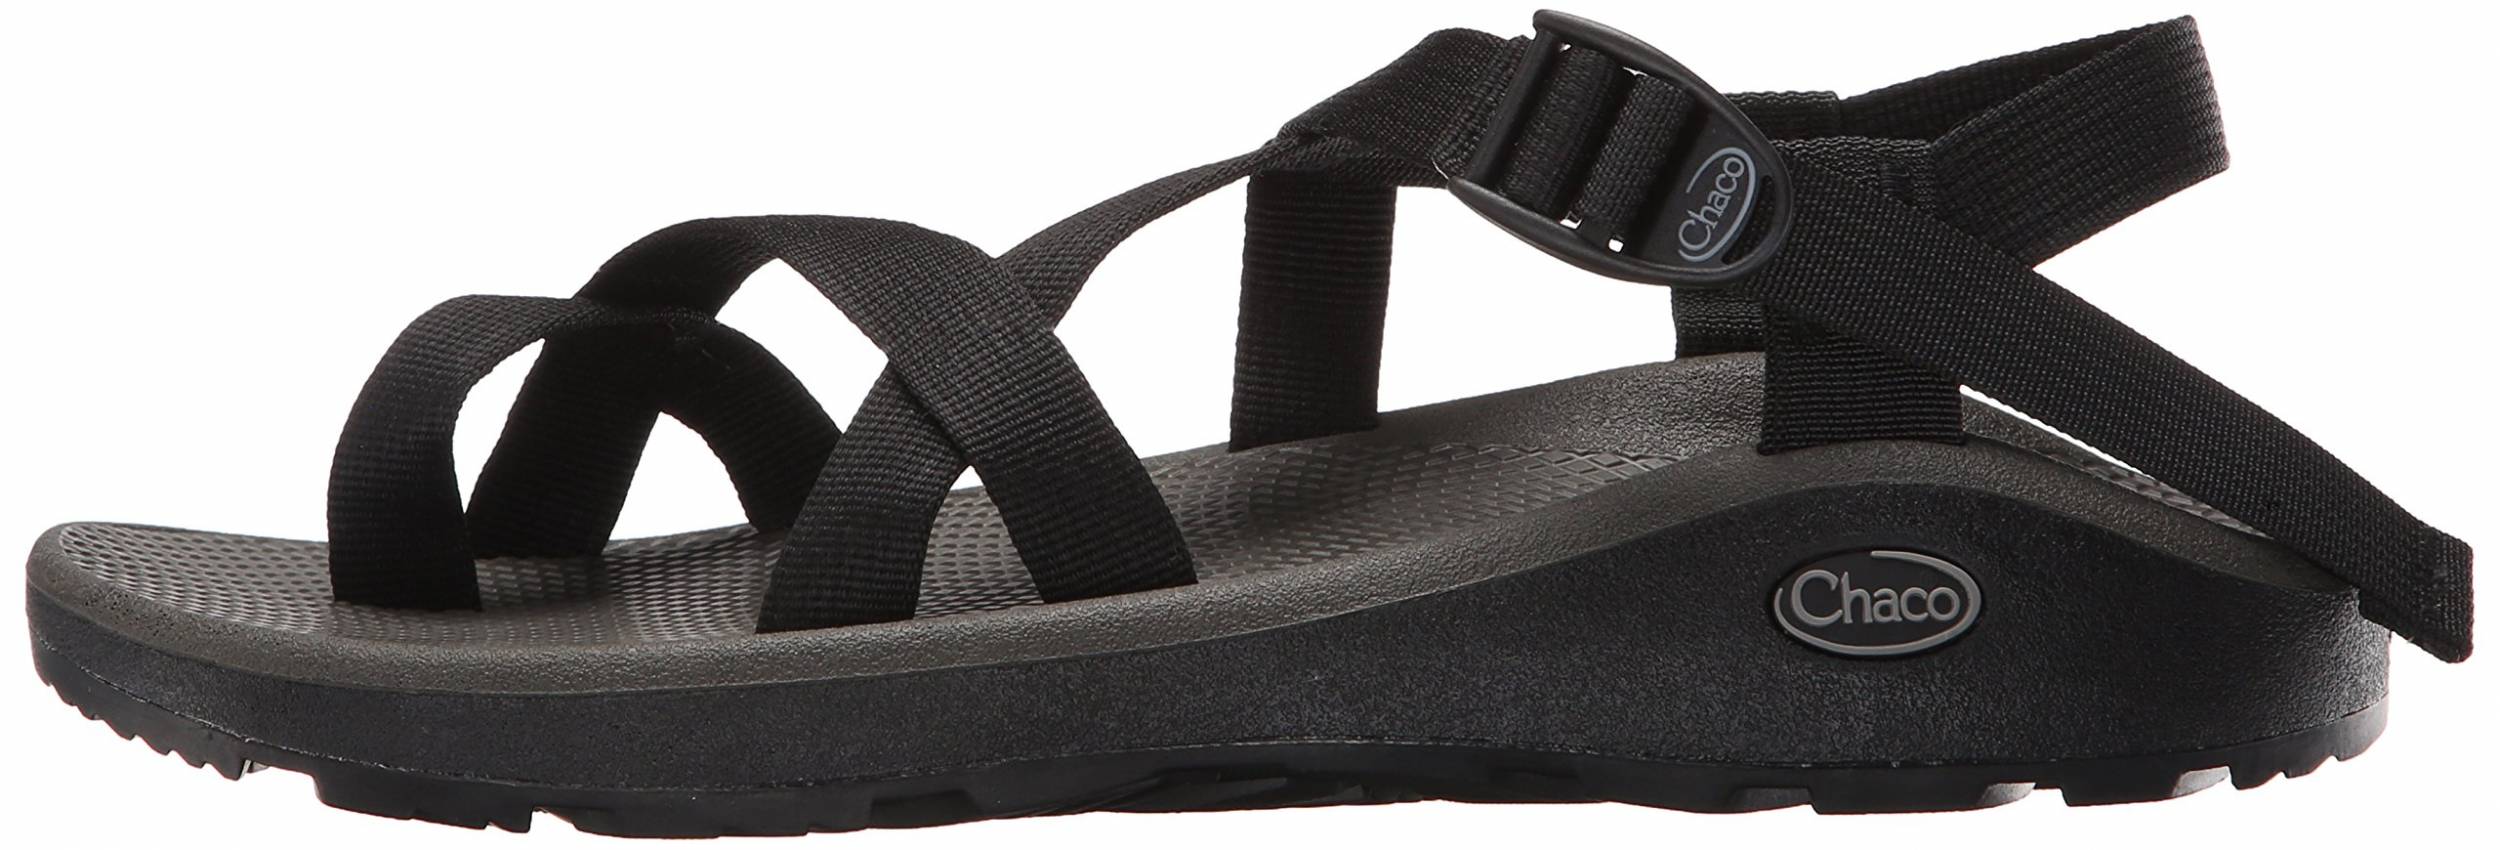 Only $28 + Review of Chaco Z/Cloud 2 